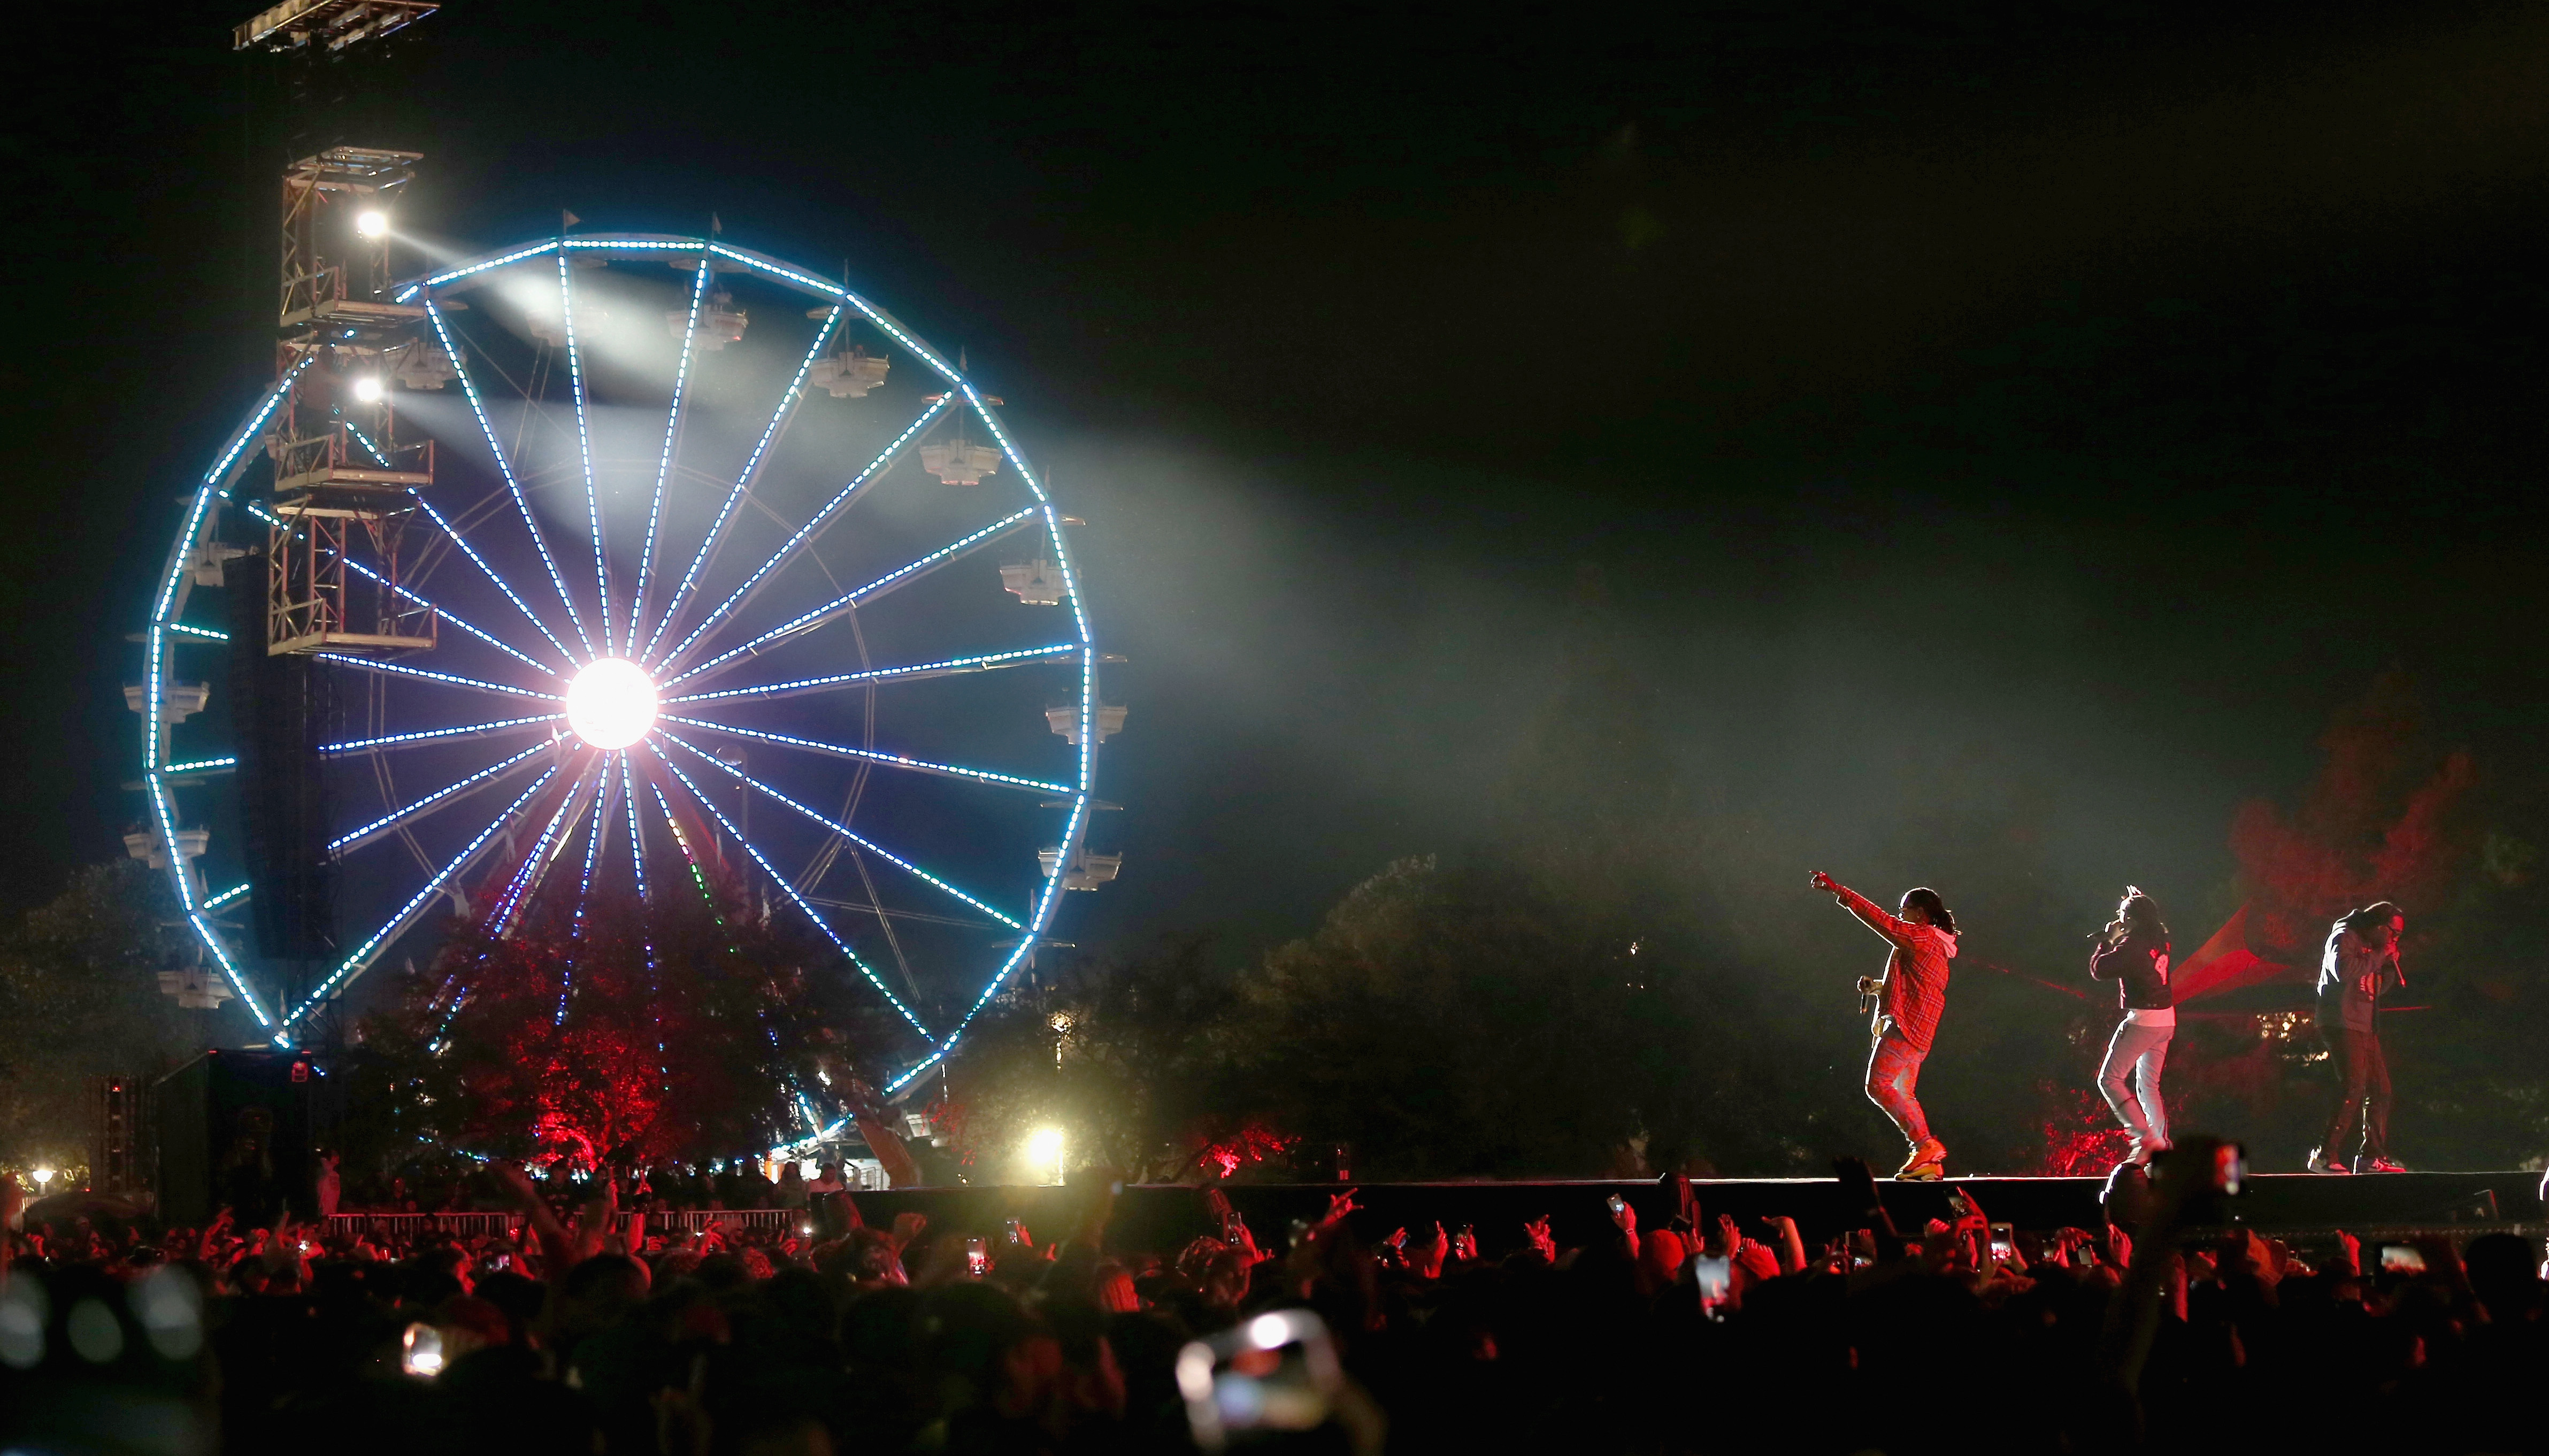 What We Know So Far About The Victims Of The Astroworld Festival Tragedy